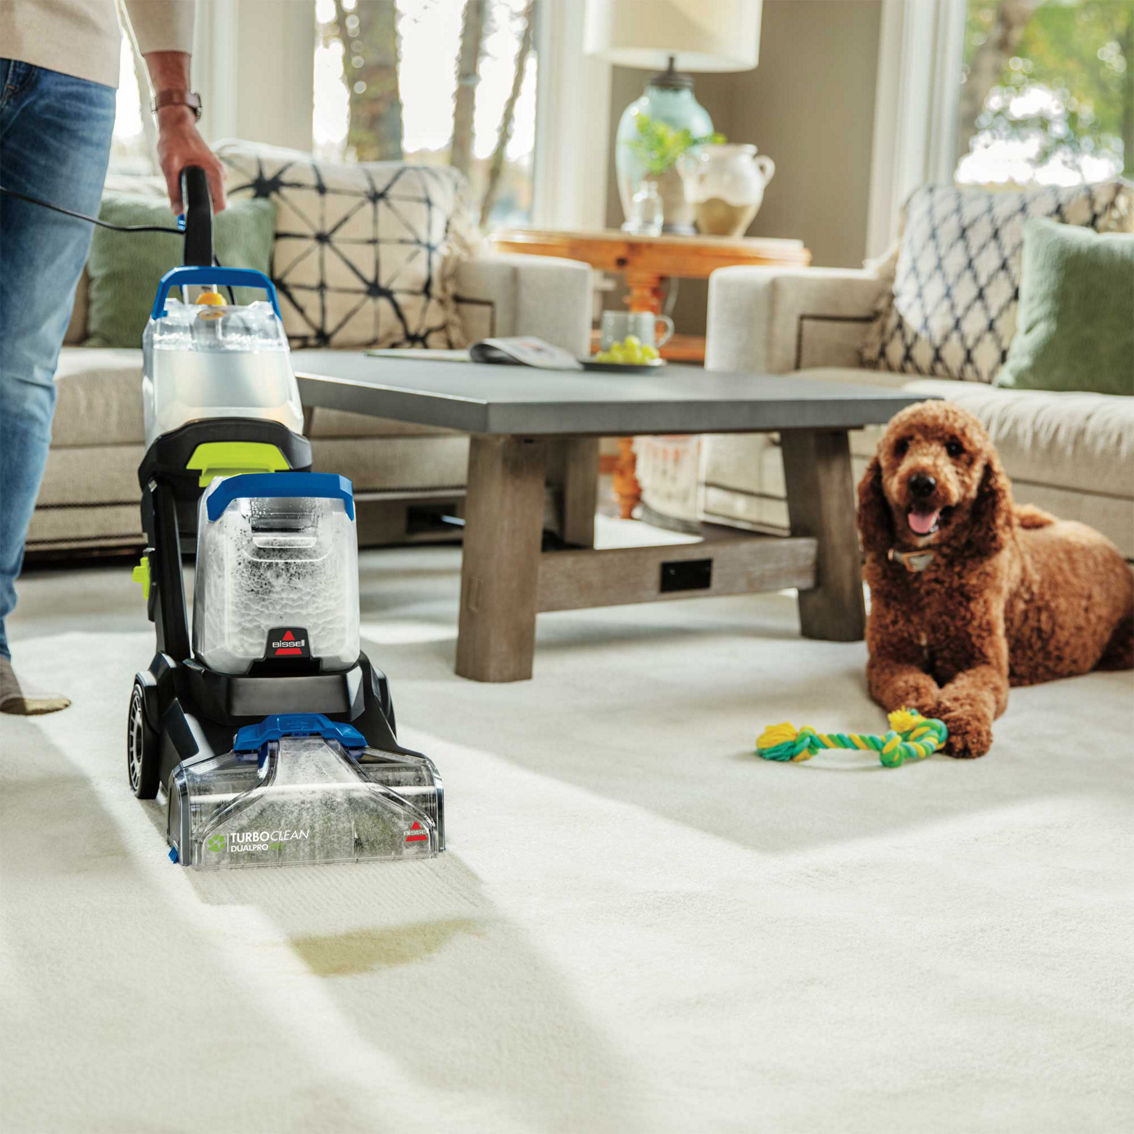 Bissell TurboClean DualPro Pet Carpet Cleaner - Image 3 of 10